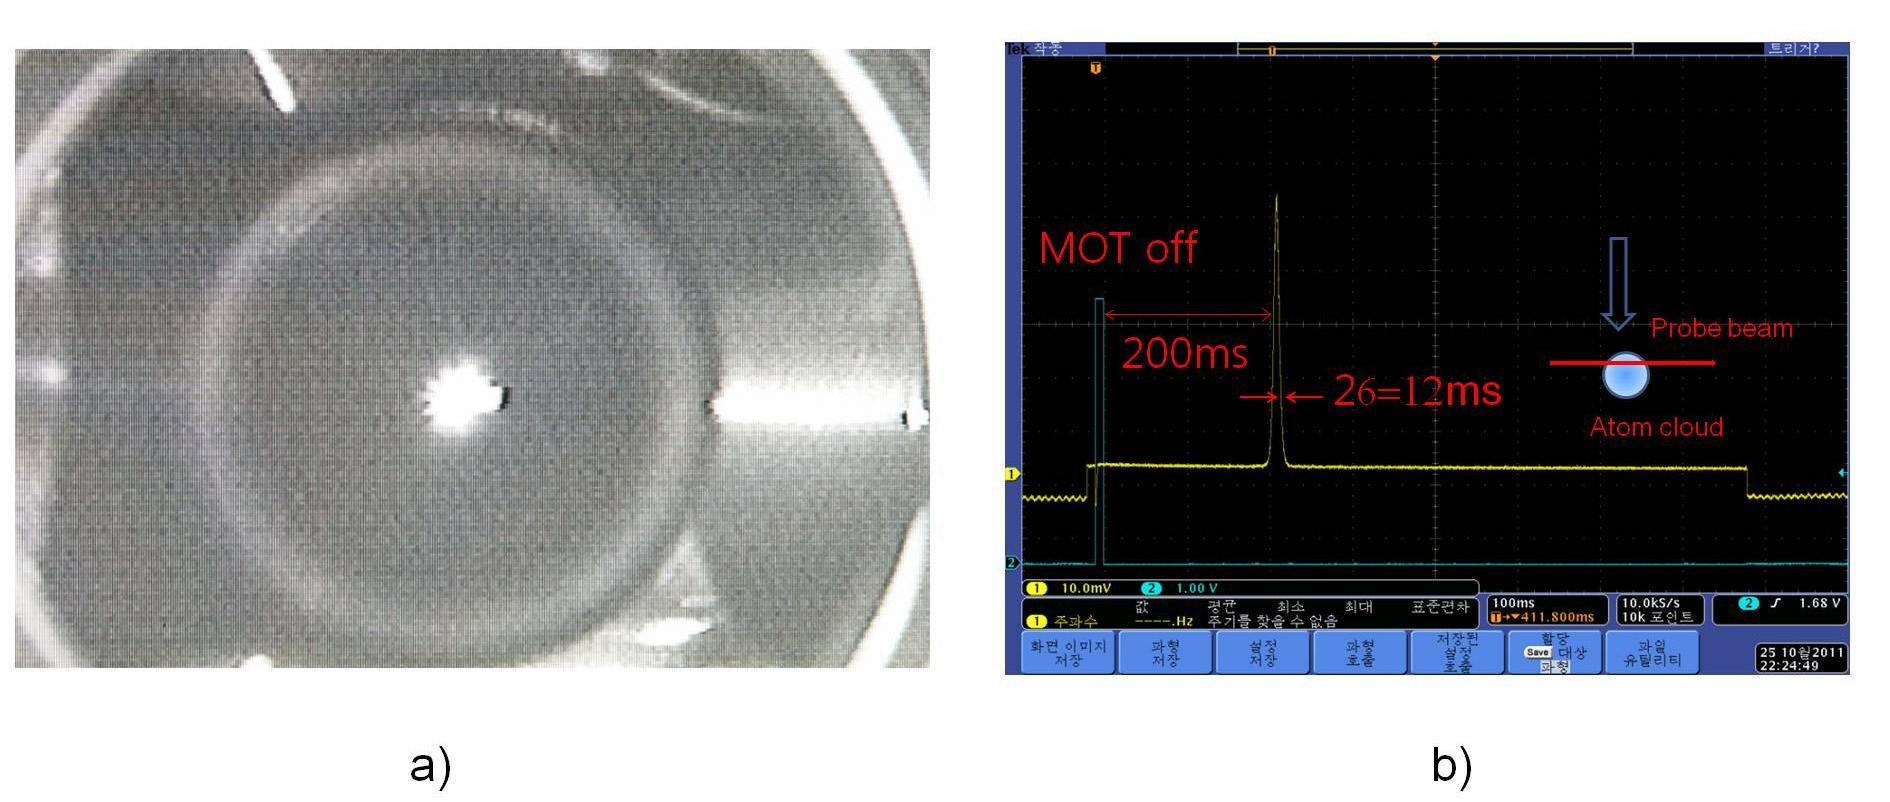 a) Image of trapped atoms in MOT, b) a fluorescence signal of free falling atoms illuminated by probe beam.